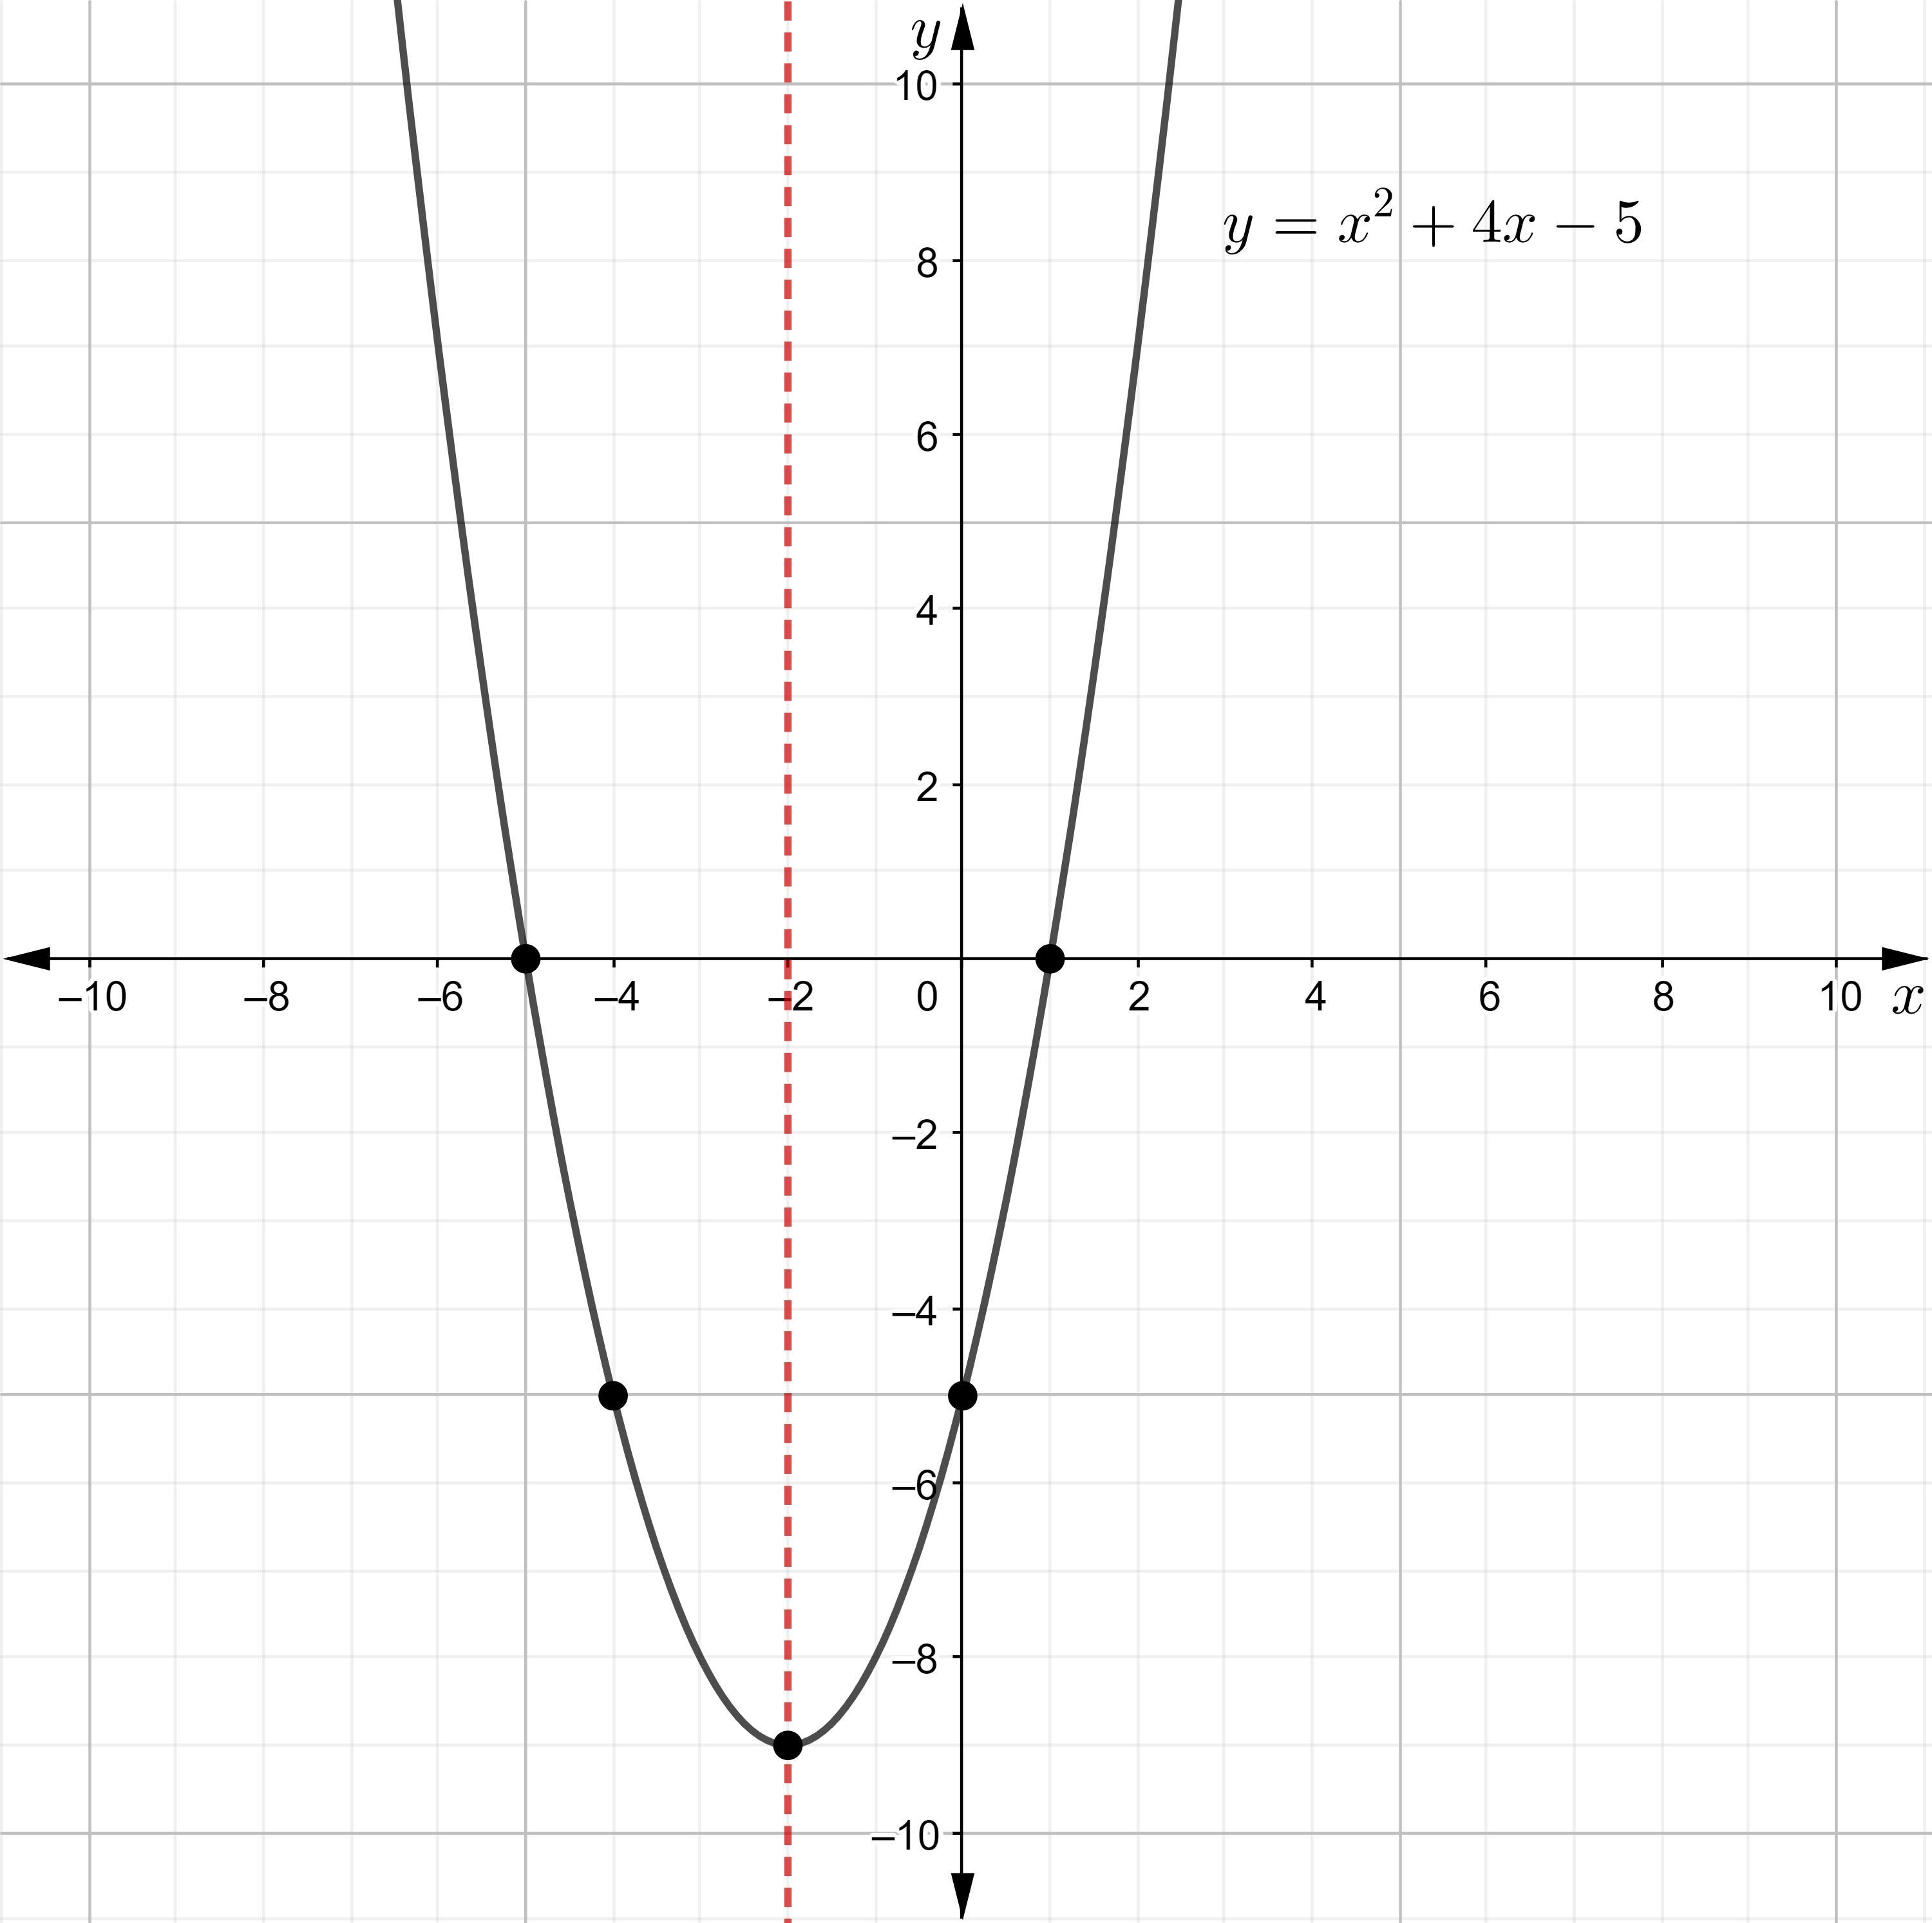 Graph The Equation Y=x2+4x-5 On The Accompanying Set Of Axes. You Must Plot 5 Points Including The Roots